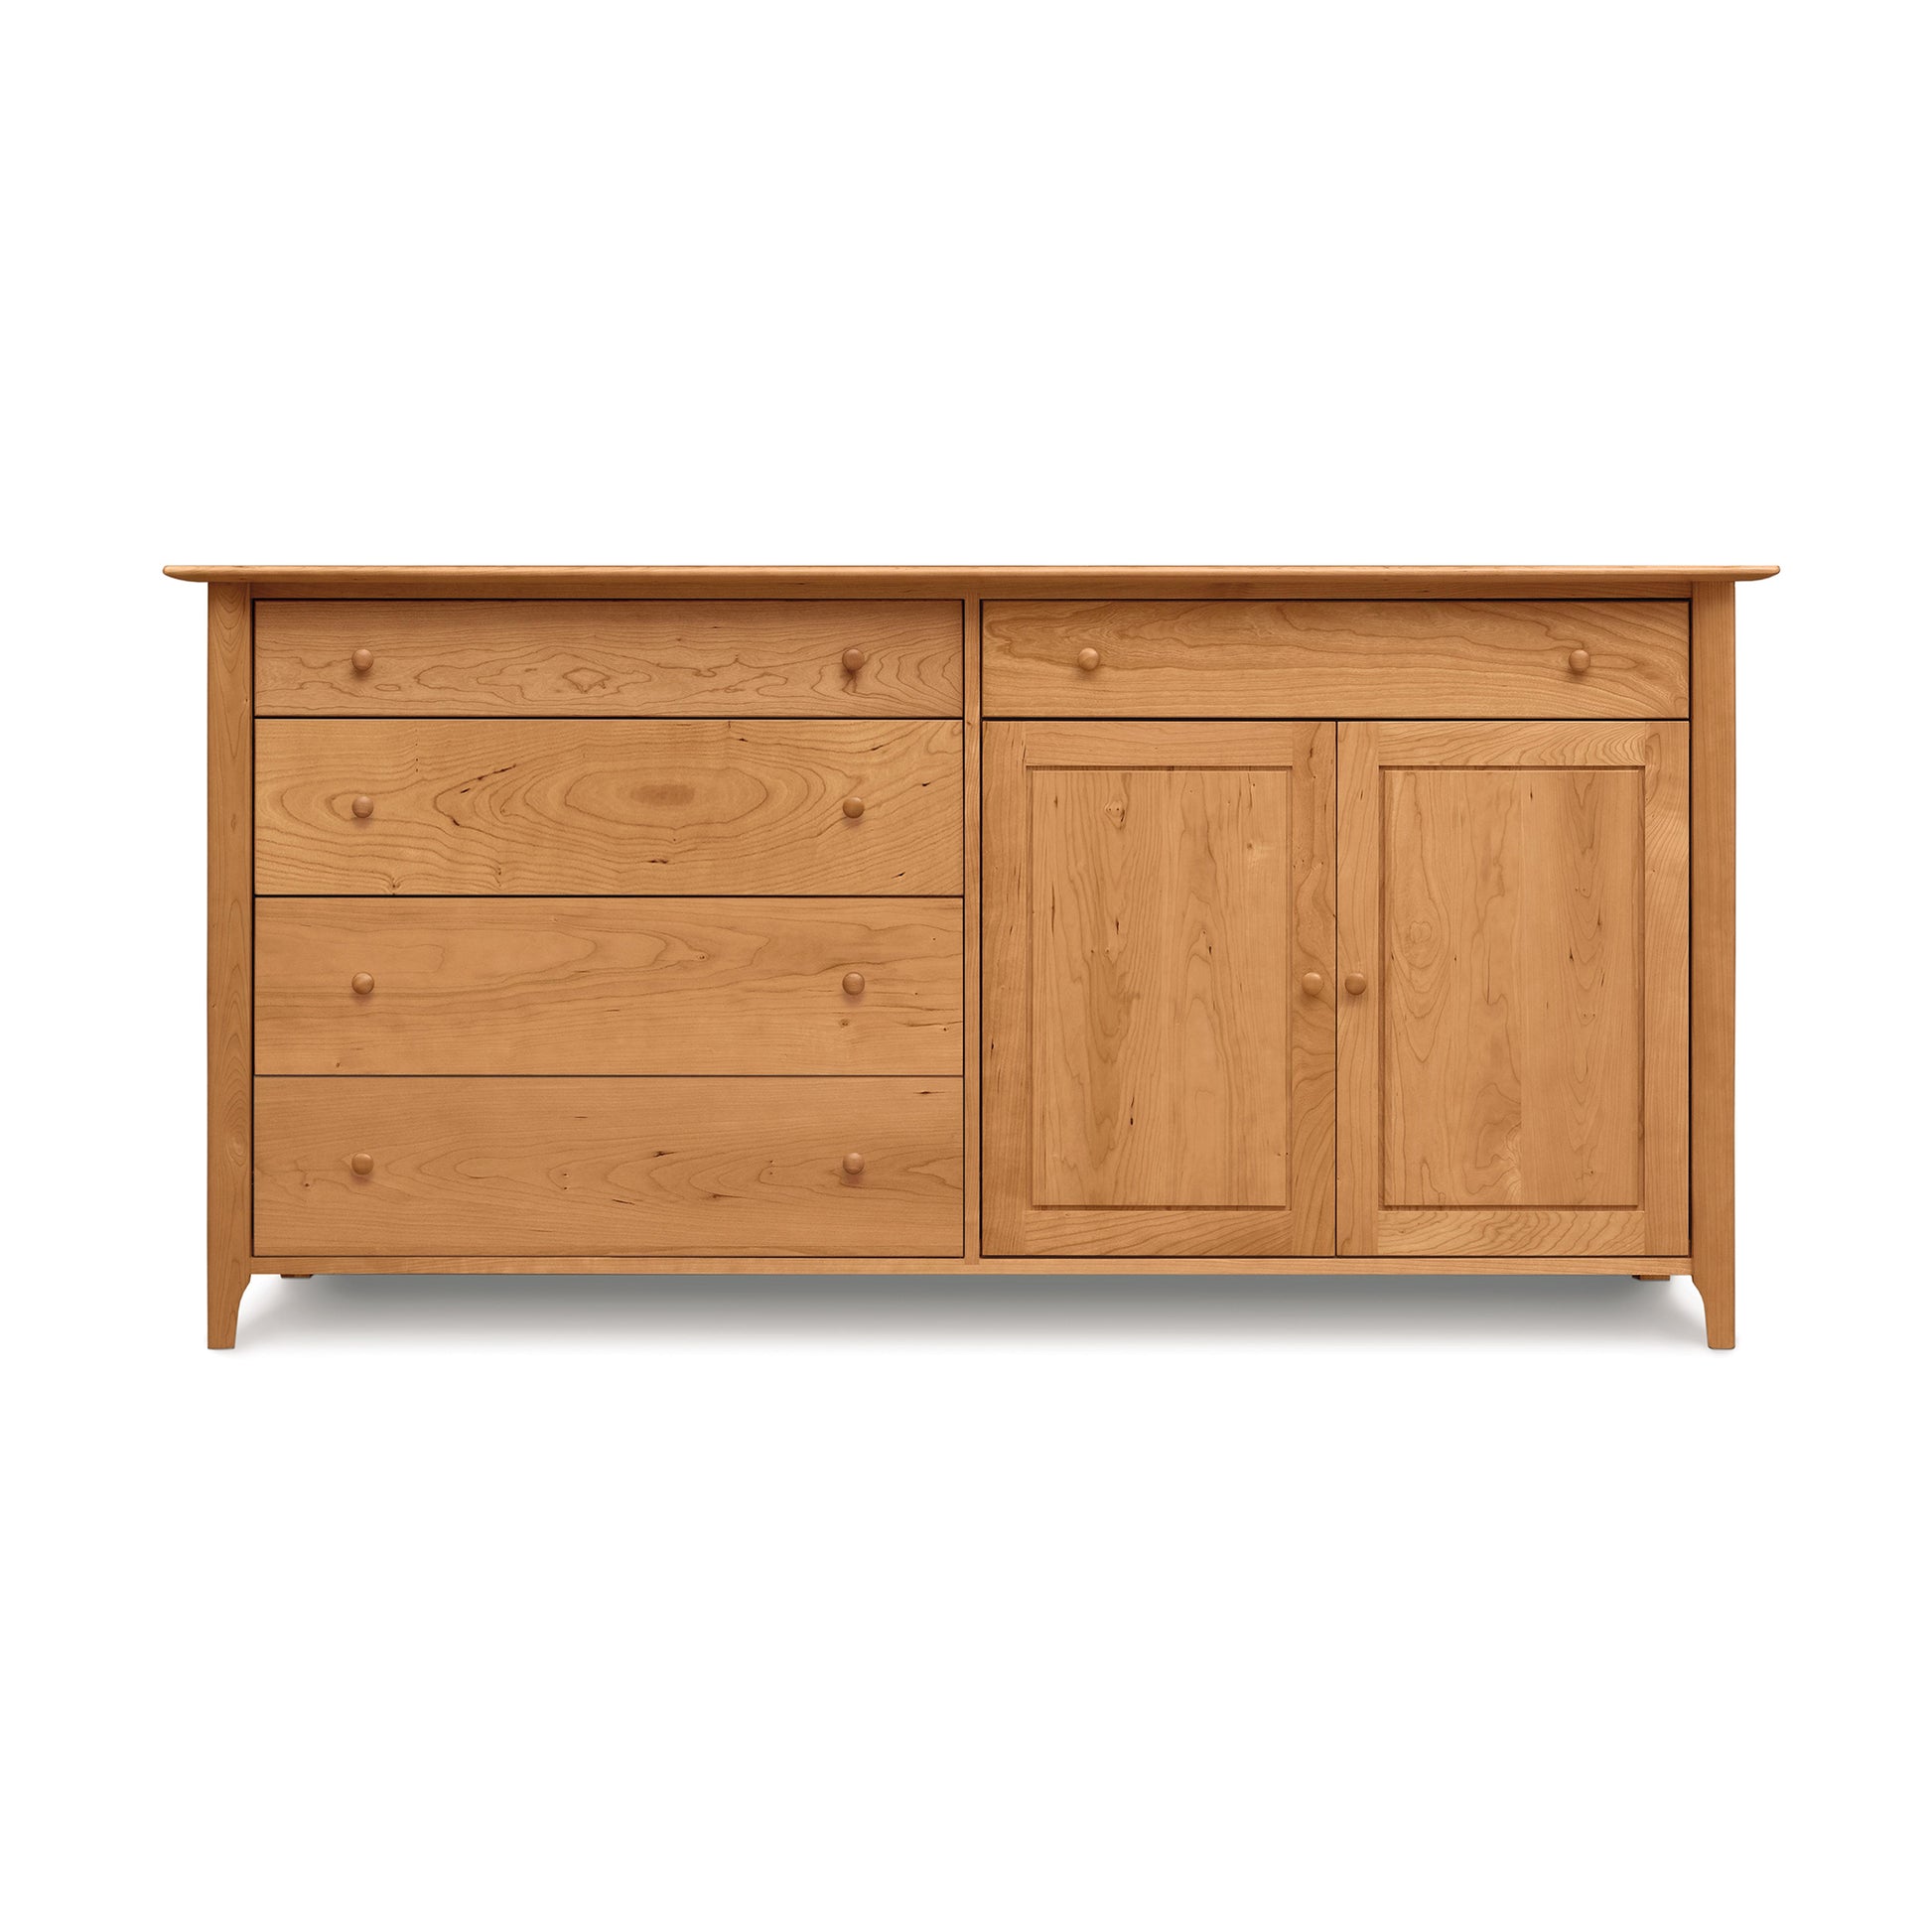 Copeland Furniture's Sarah 2 Door, 5 Drawer Buffet, a luxurious dining furniture piece featuring three drawers and two doors, all crafted from solid wood, set against a plain background.